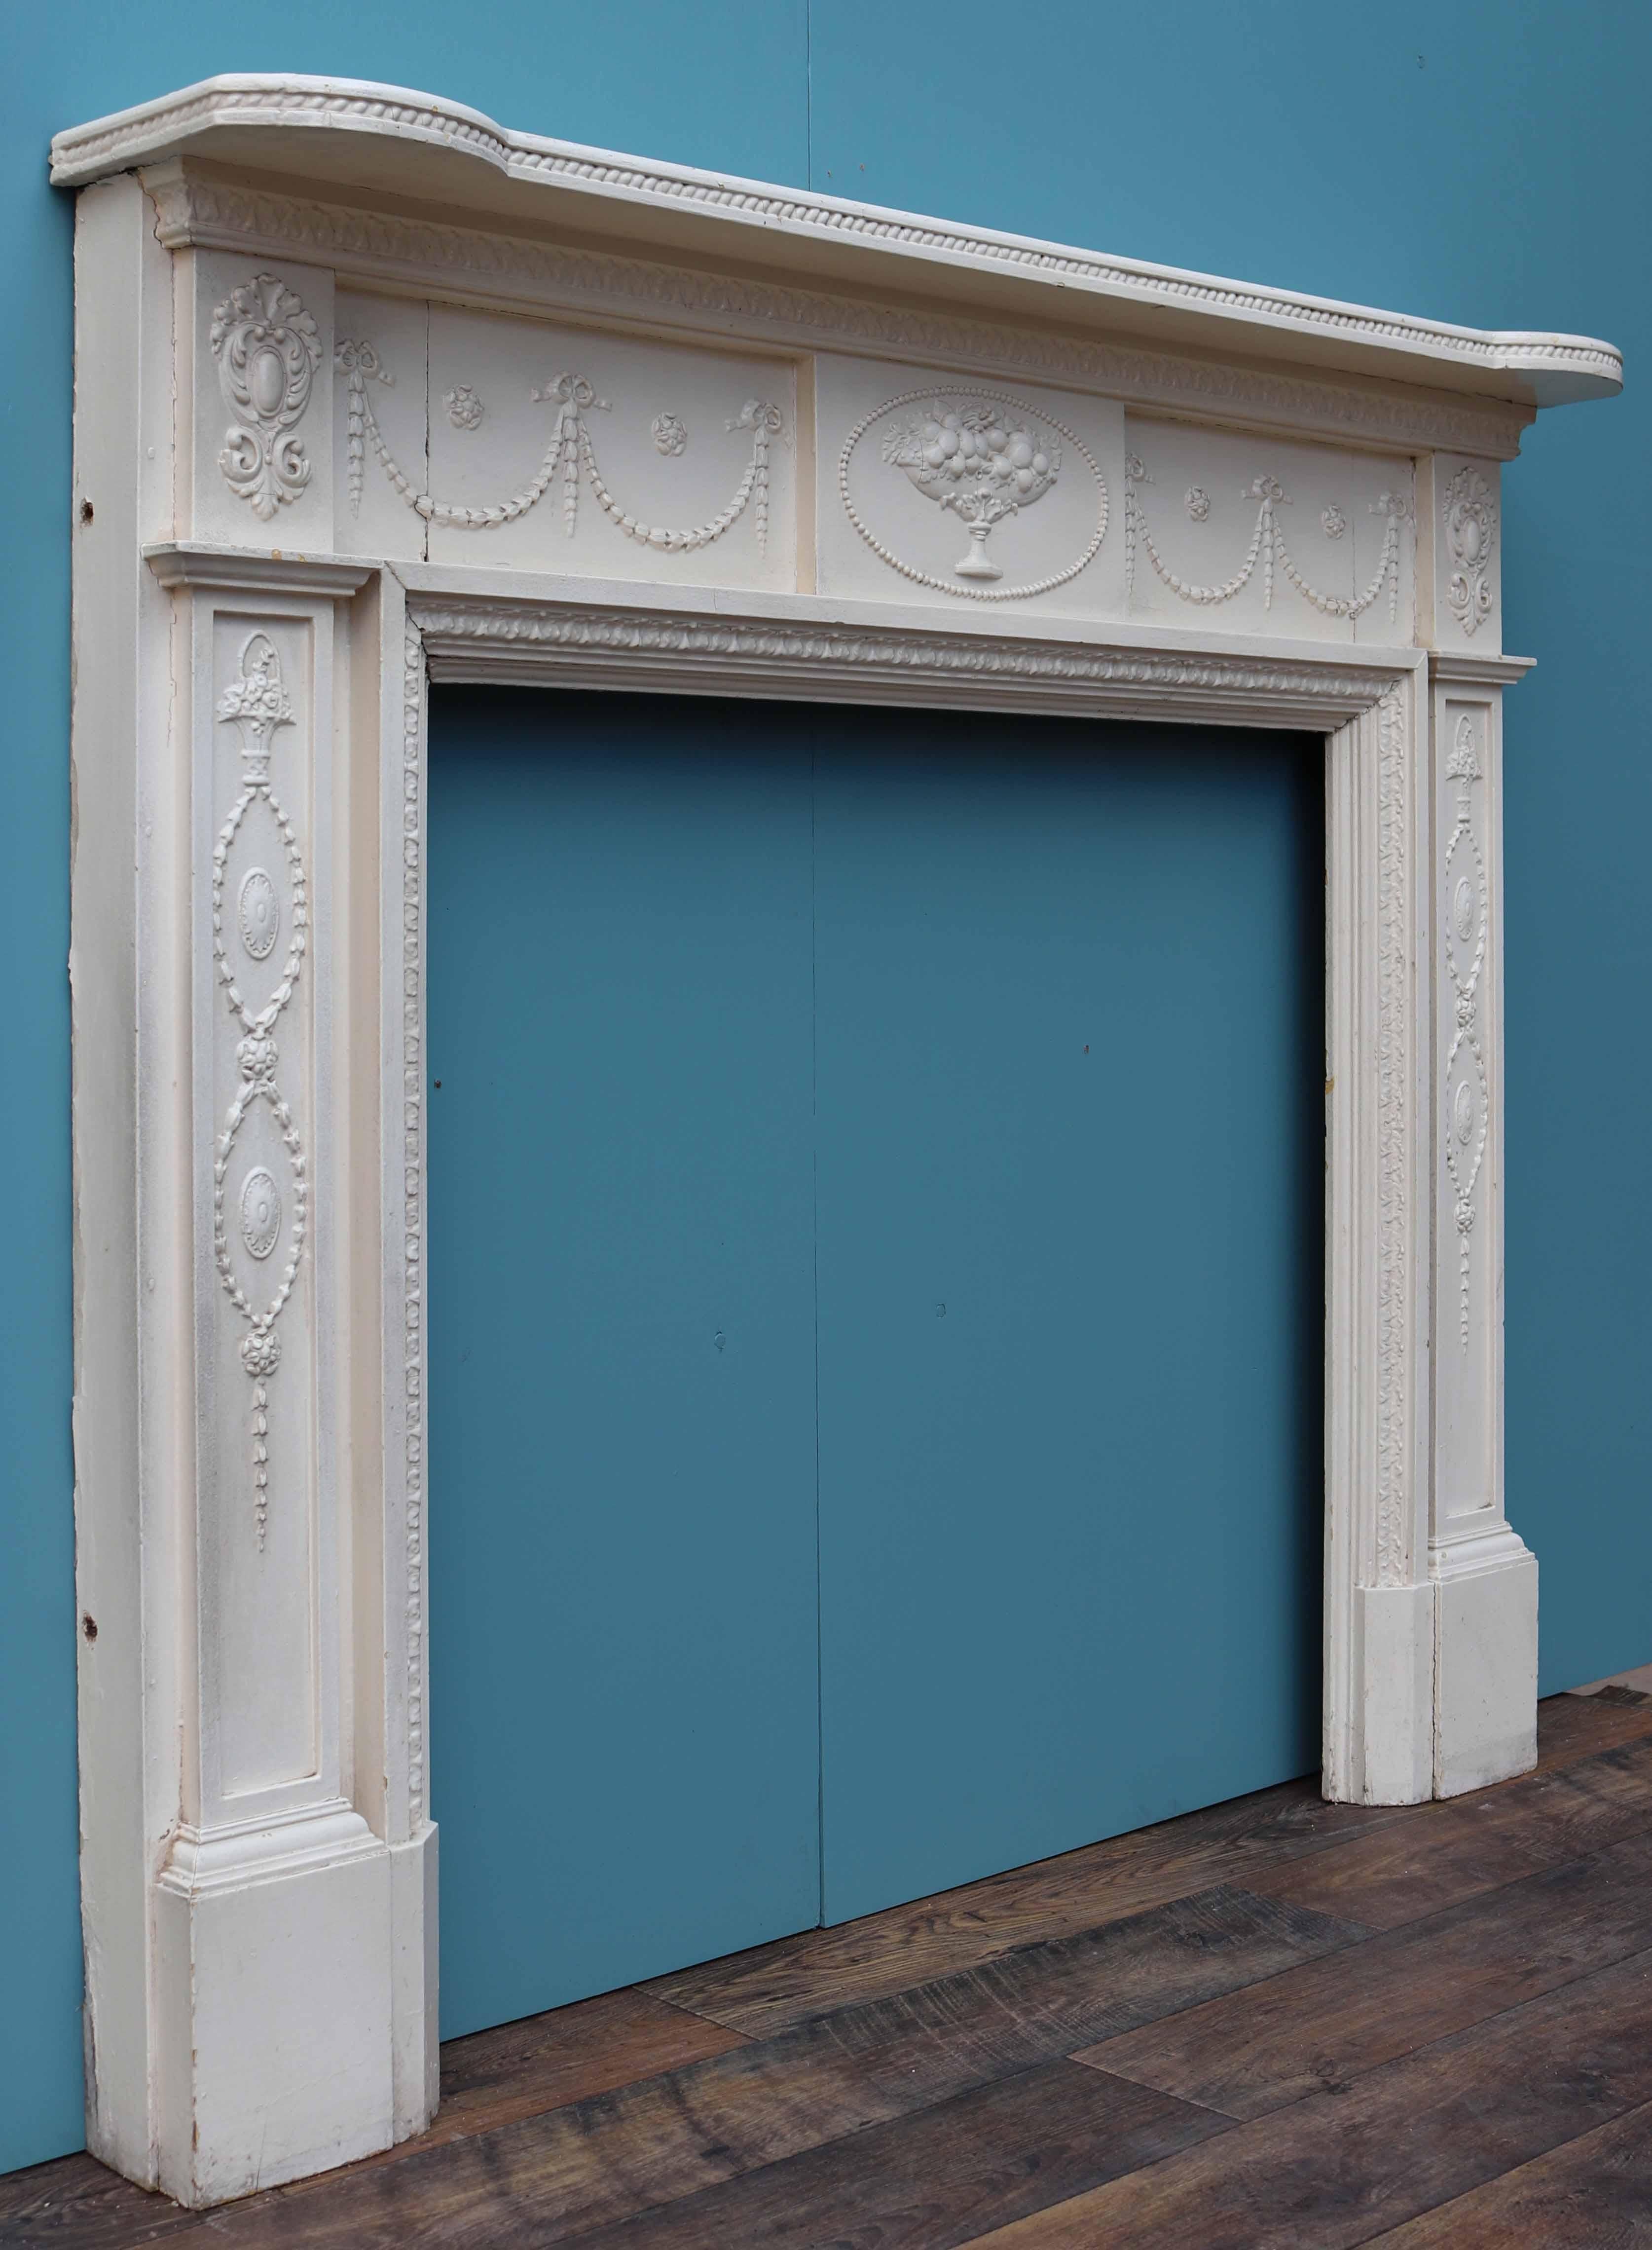 About

A pretty painted pine fire surround removed from a house in London.

Condition report

Finished in old paint with some small surface cracks.

Style

Edwardian

Date of manufacture

circa 1900

Period

Early 20th